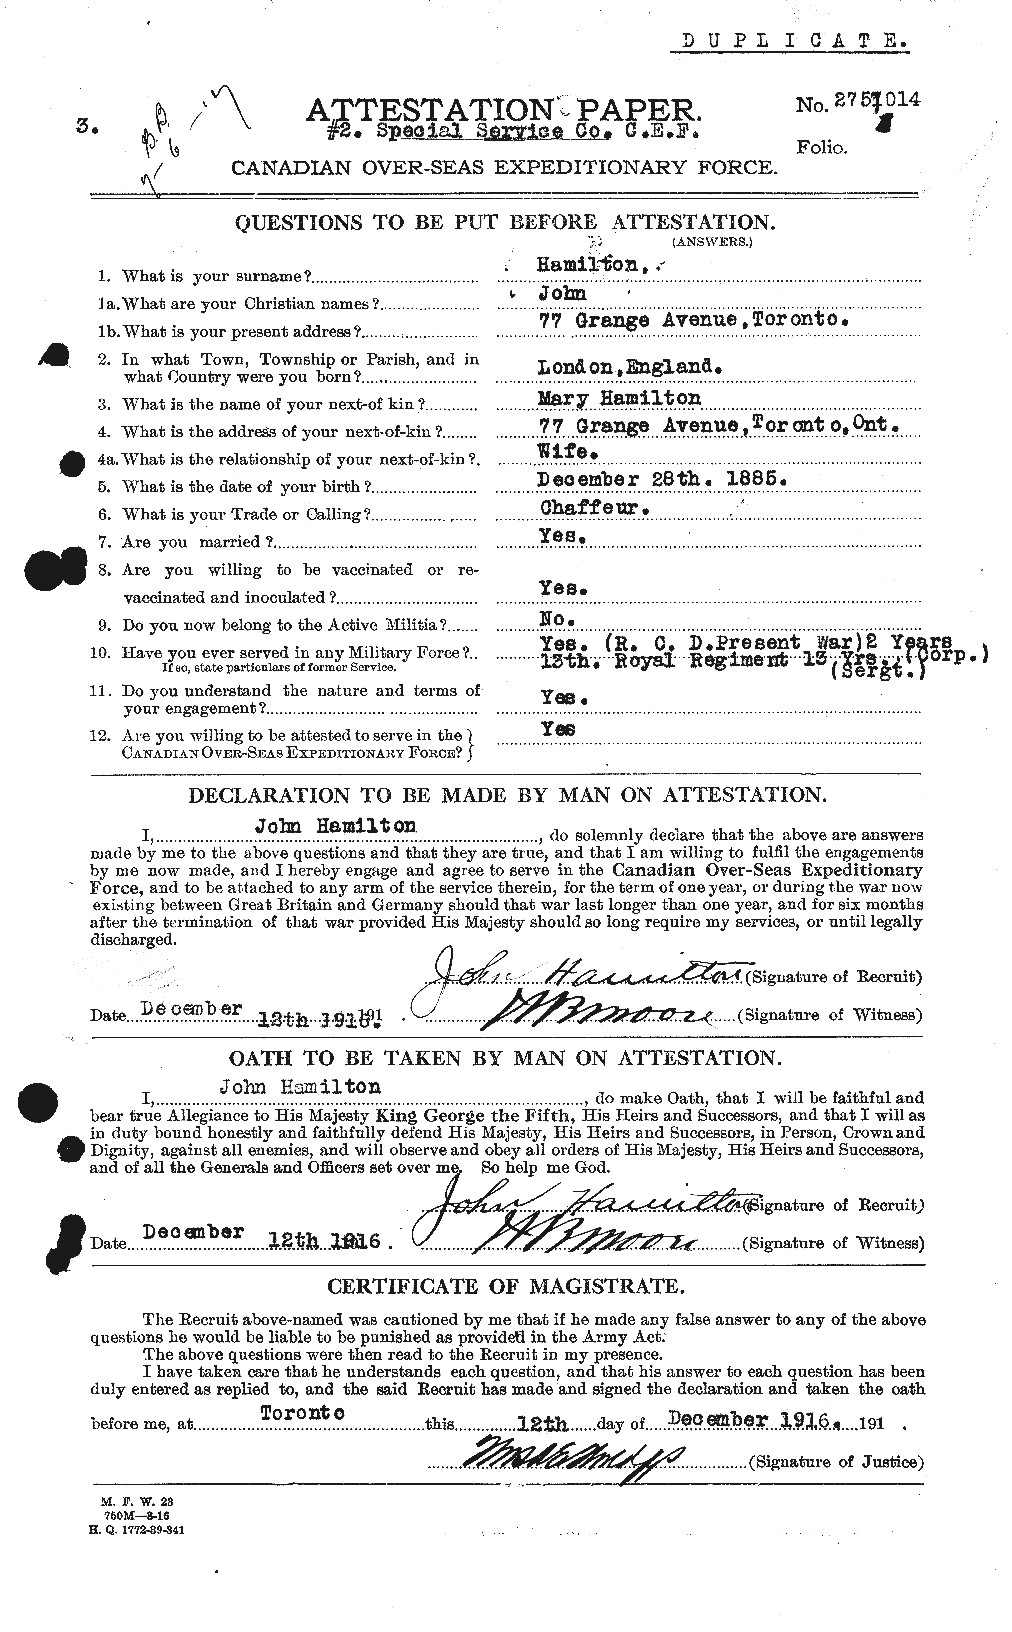 Personnel Records of the First World War - CEF 373028a